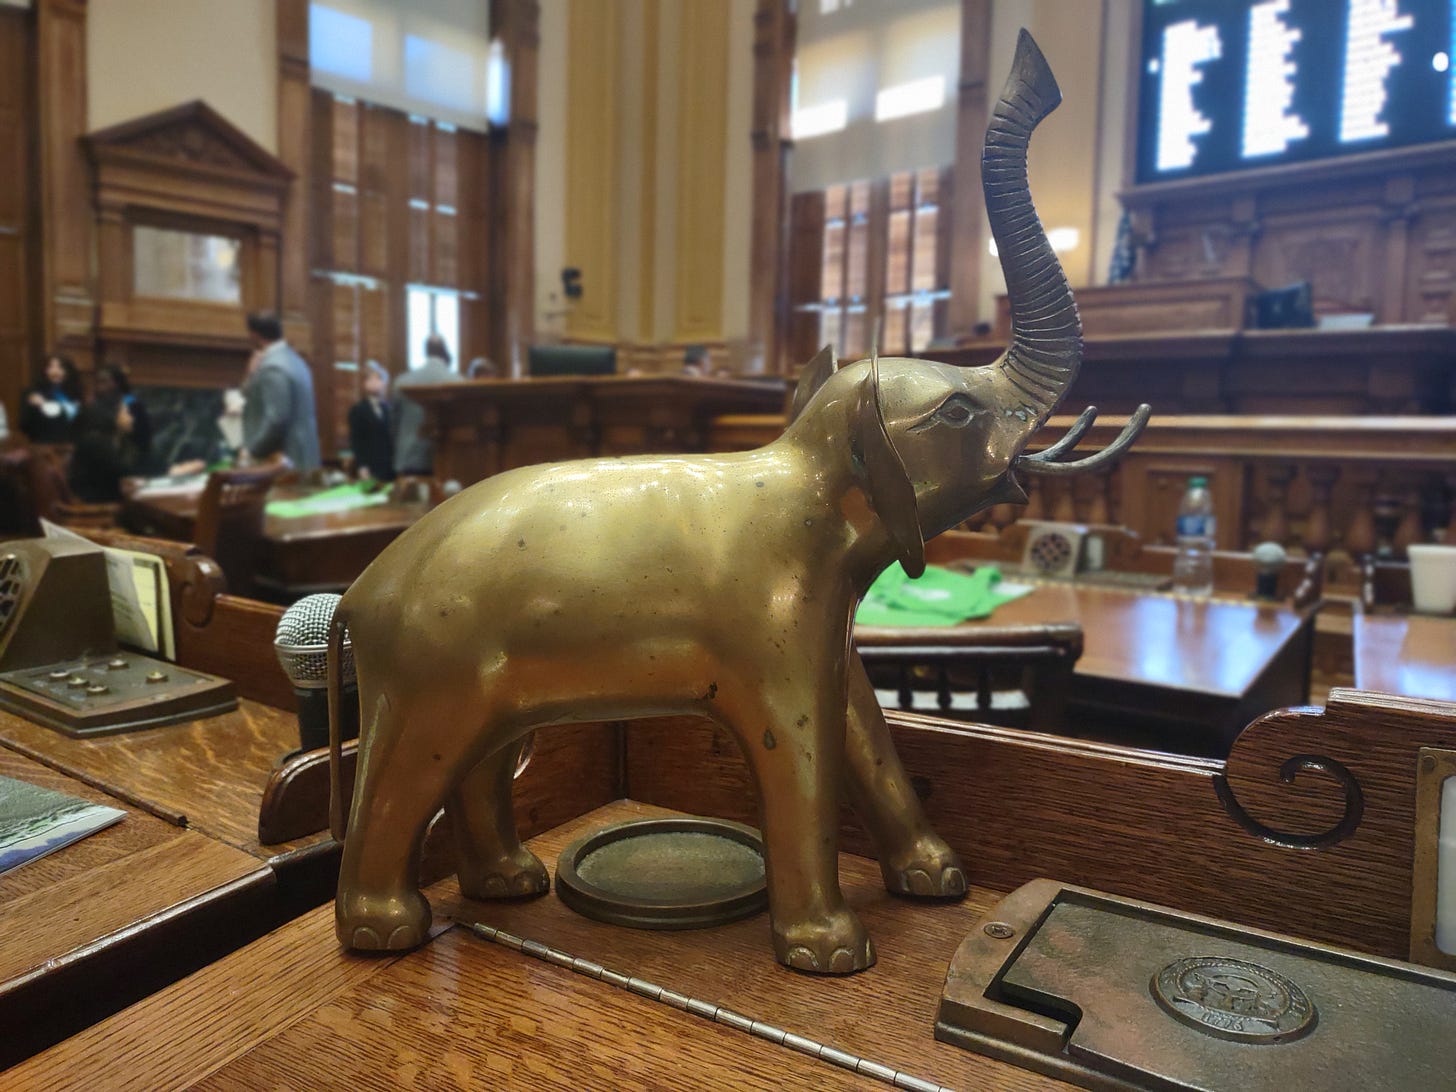 The Senate GOP brass elephant, awarded and passed along to the "best" GOP Senator each day.